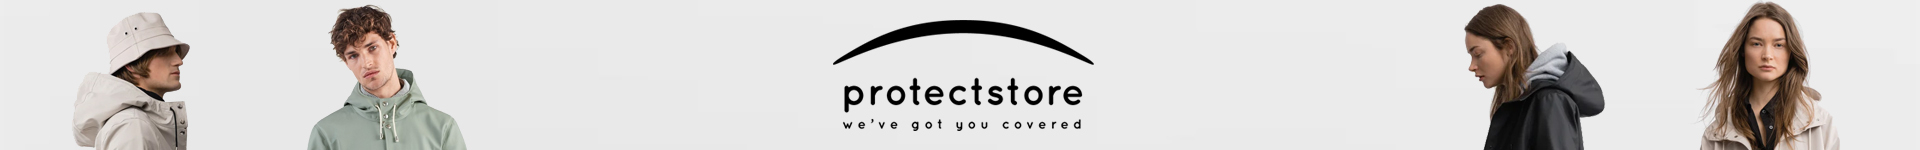 Protectstores achtergrond